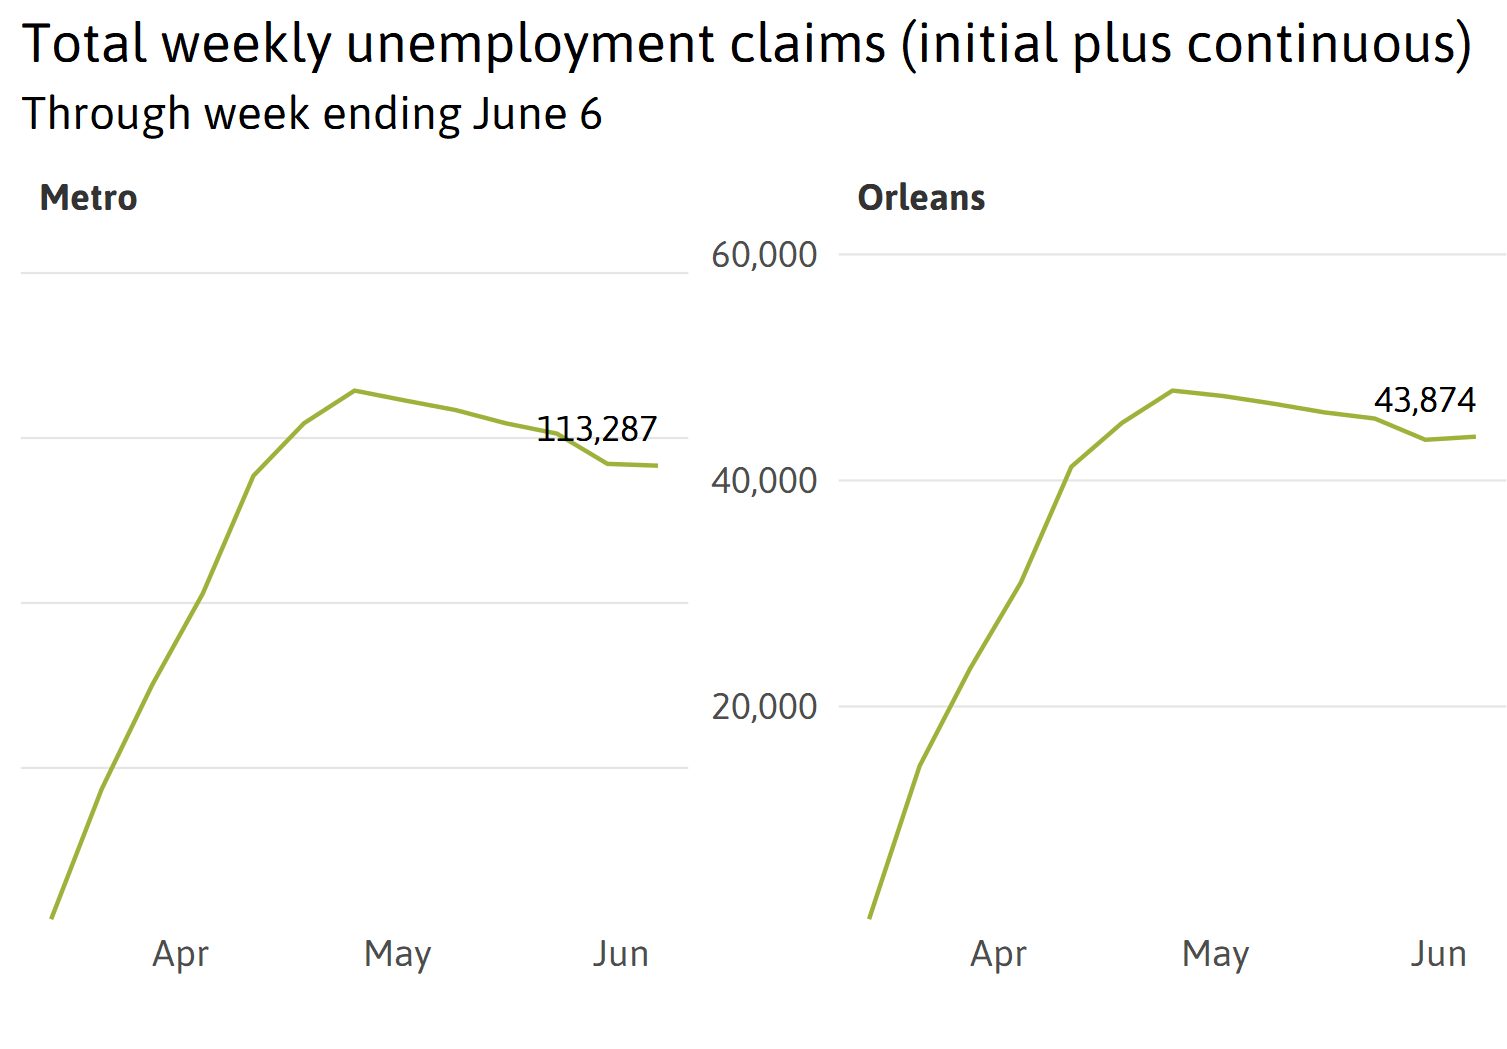 Coming into focus: Early indicators of pandemic job loss in the New Orleans metro area